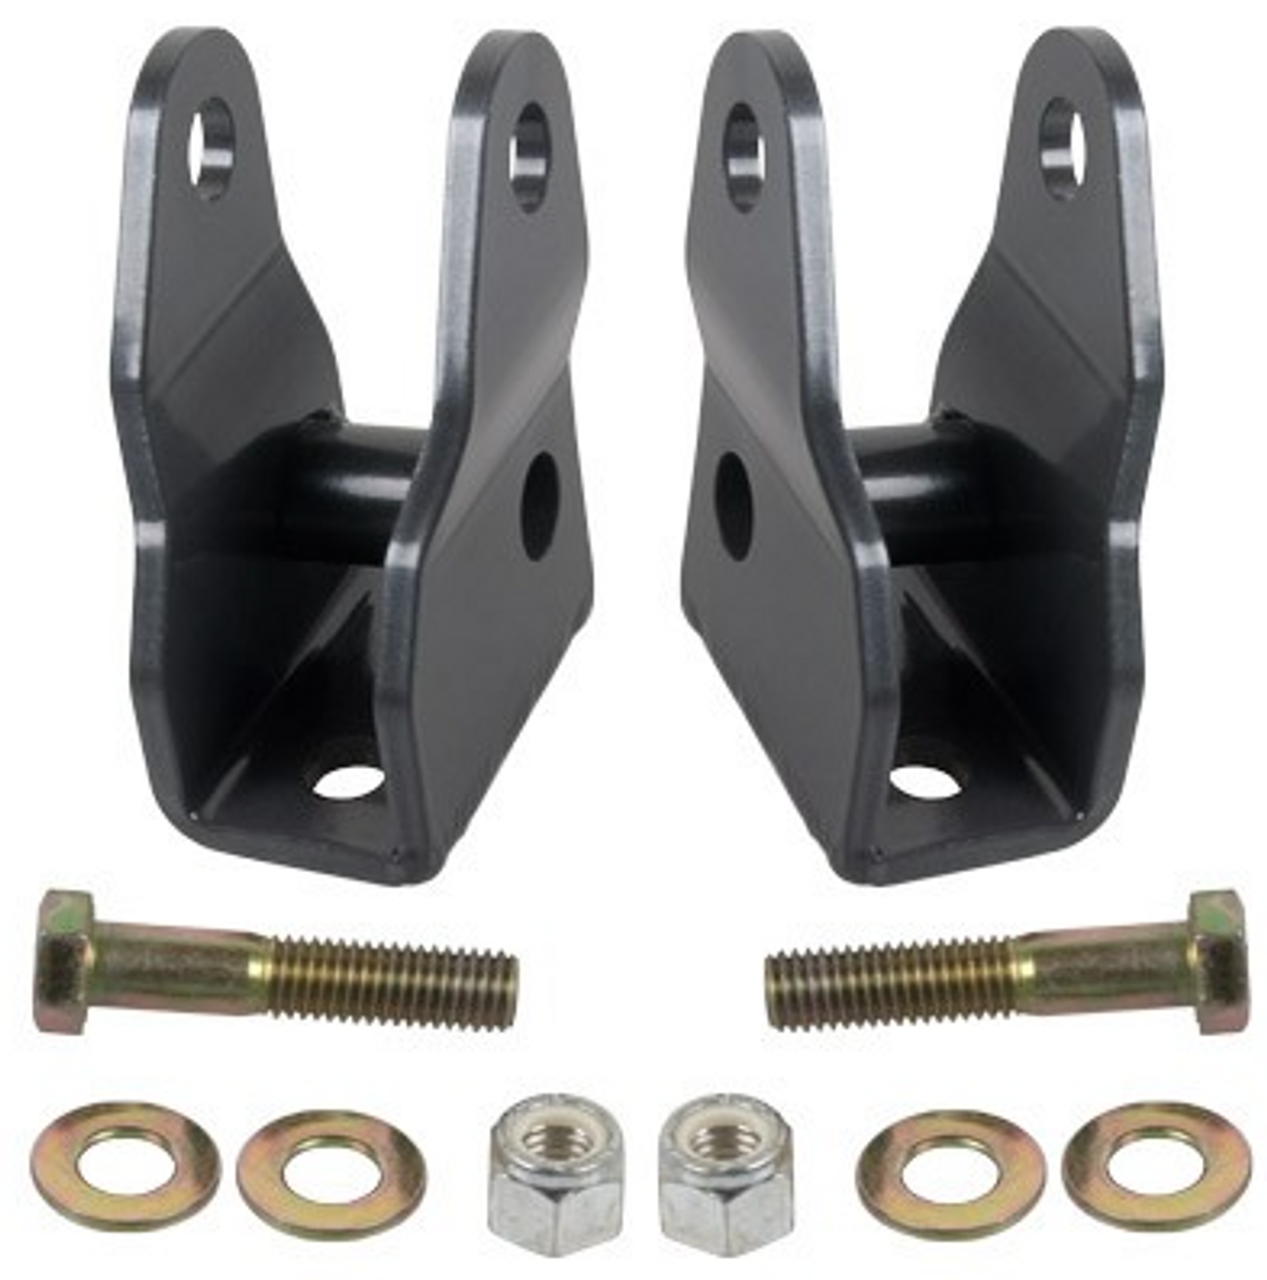 Synergy 8015 Front Lower Shock Extension Brackets for Jeep Wrangler JK 2007-2018